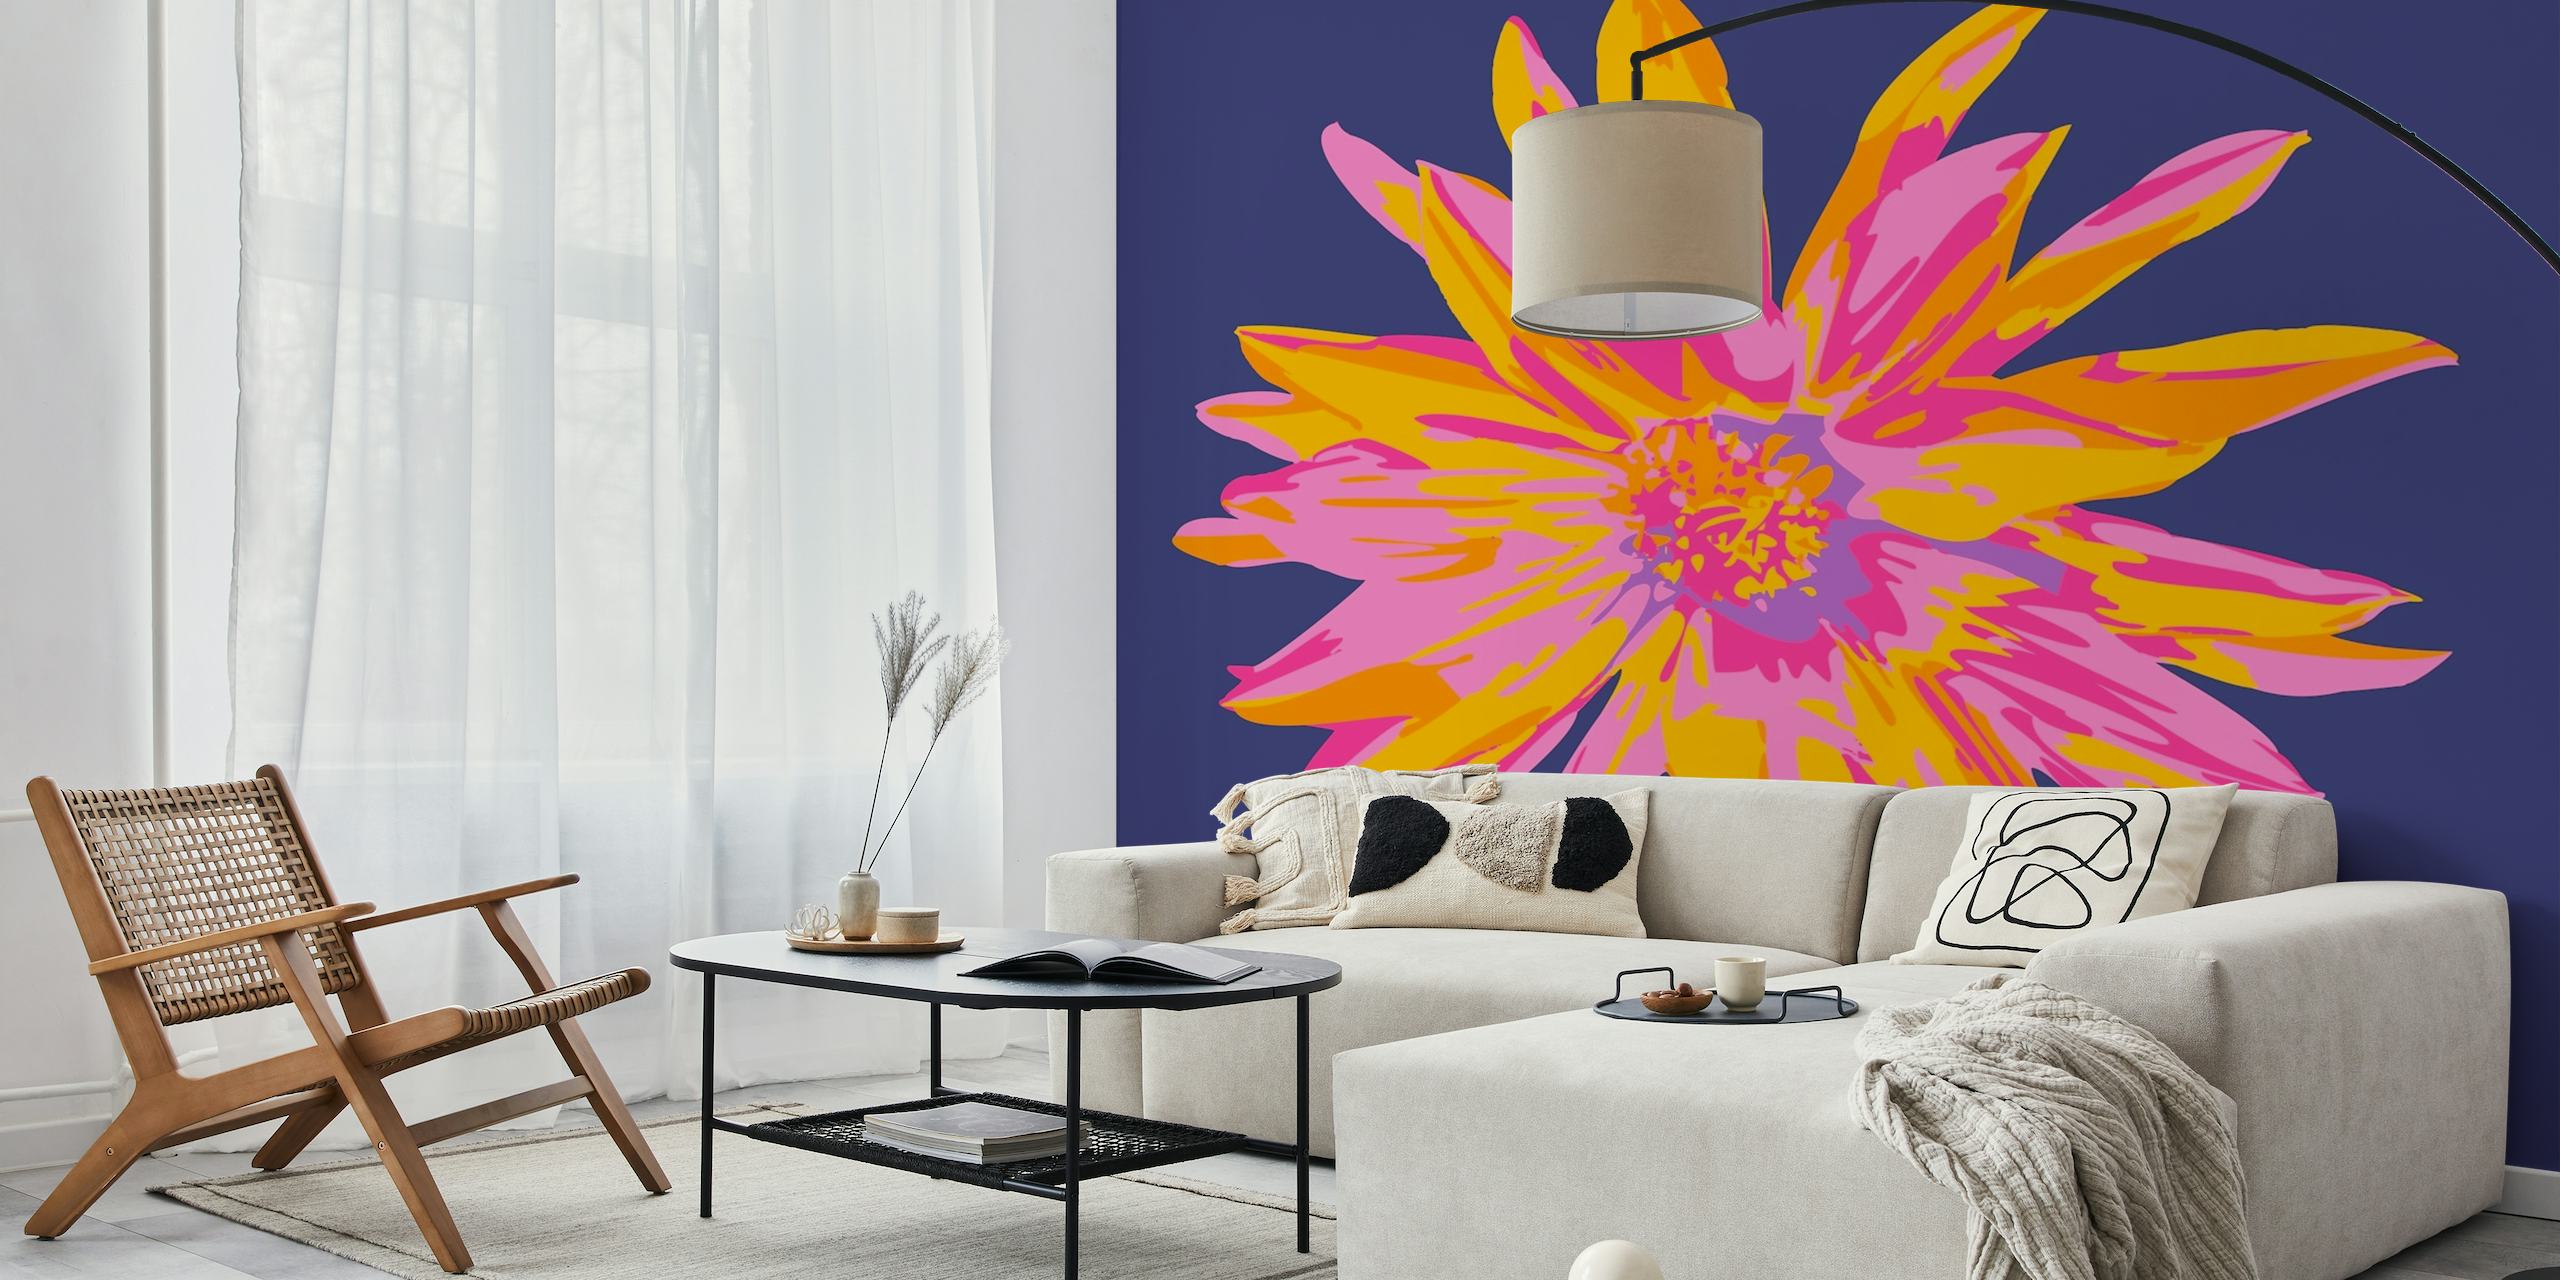 Abstract dahlia flower wall mural with bright pink and orange petals on dark blue background.